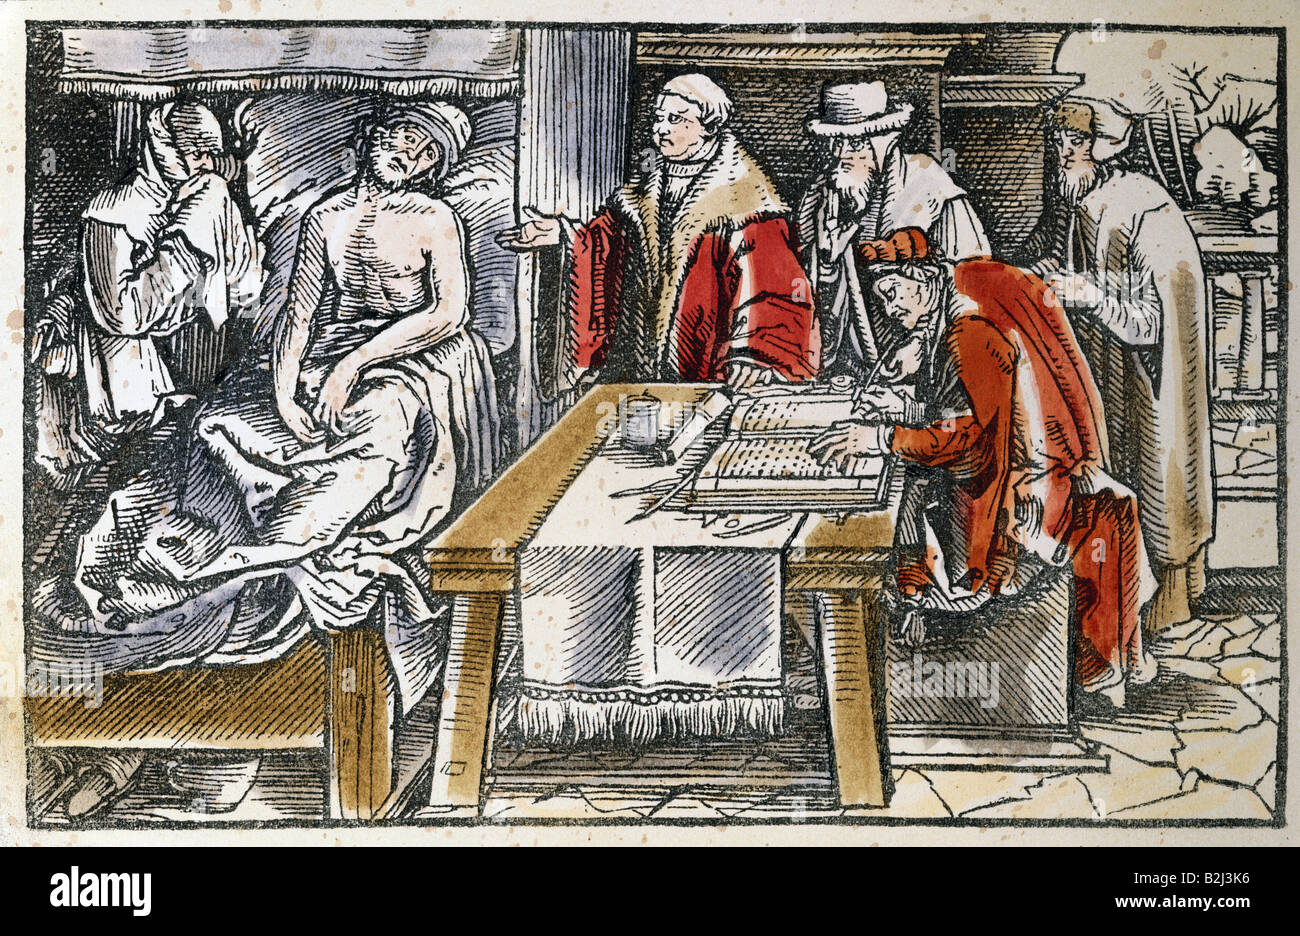 justice, notary publics, notary public, writing down will, woodcut, coloured, by the 'Petrarca master', from 'Trostspiegel in Glueck und Unglueck' (Comfort mirror in happiness and unhappiness), by Francesco Petrarca (1304 - 1374), Augsburg, Germany, 1539, Stock Photo